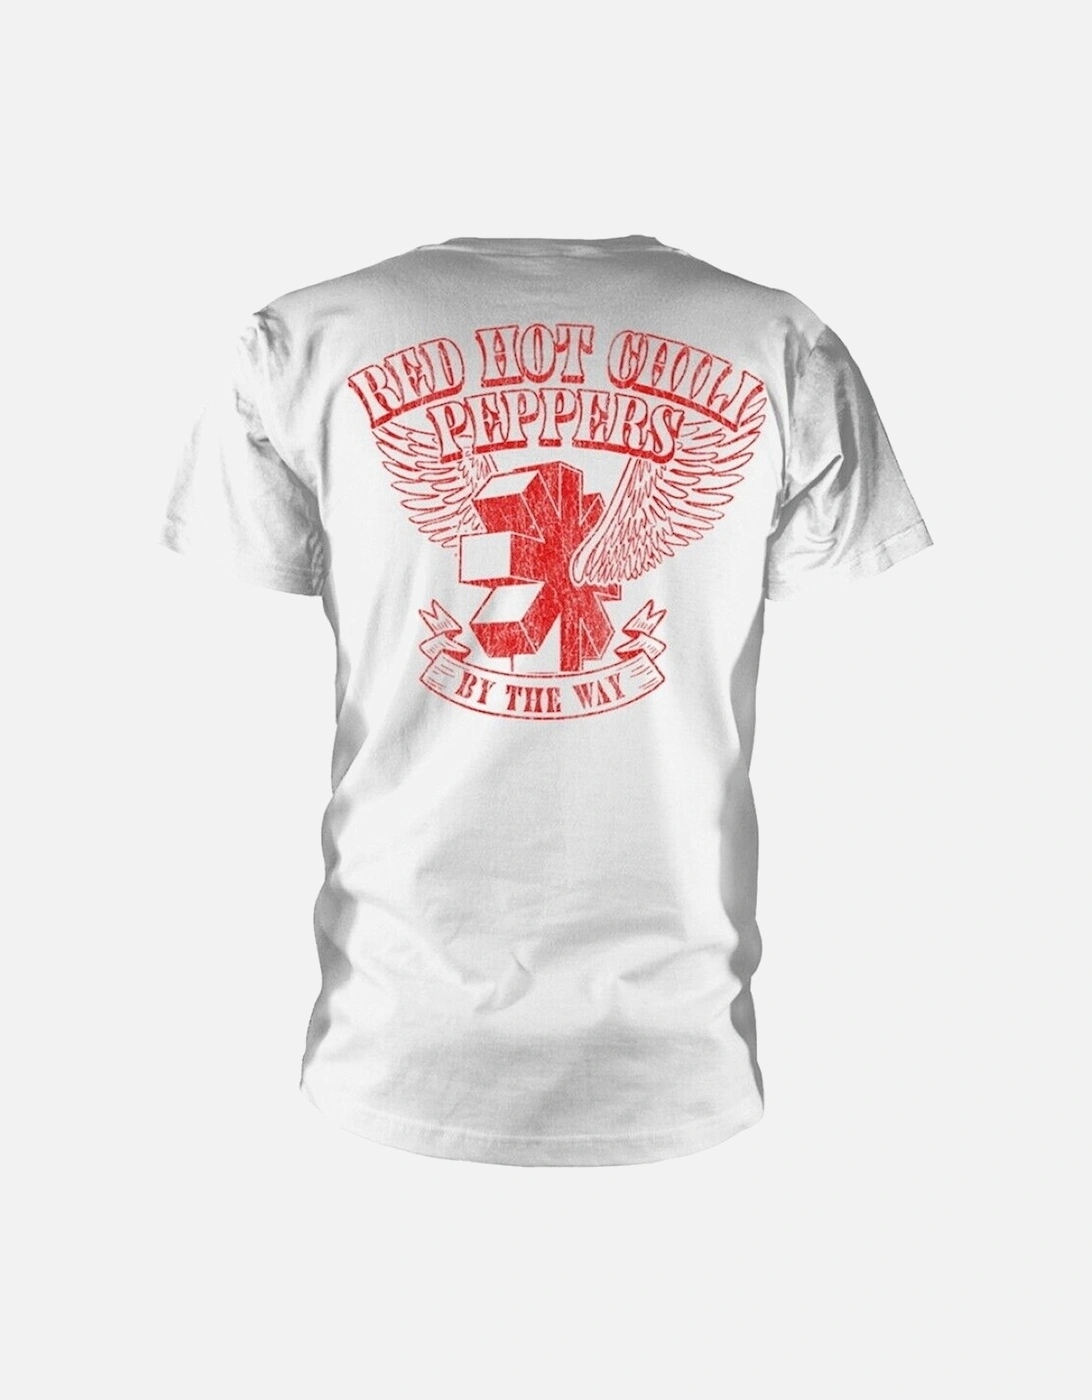 Unisex Adult By The Way Wings T-Shirt